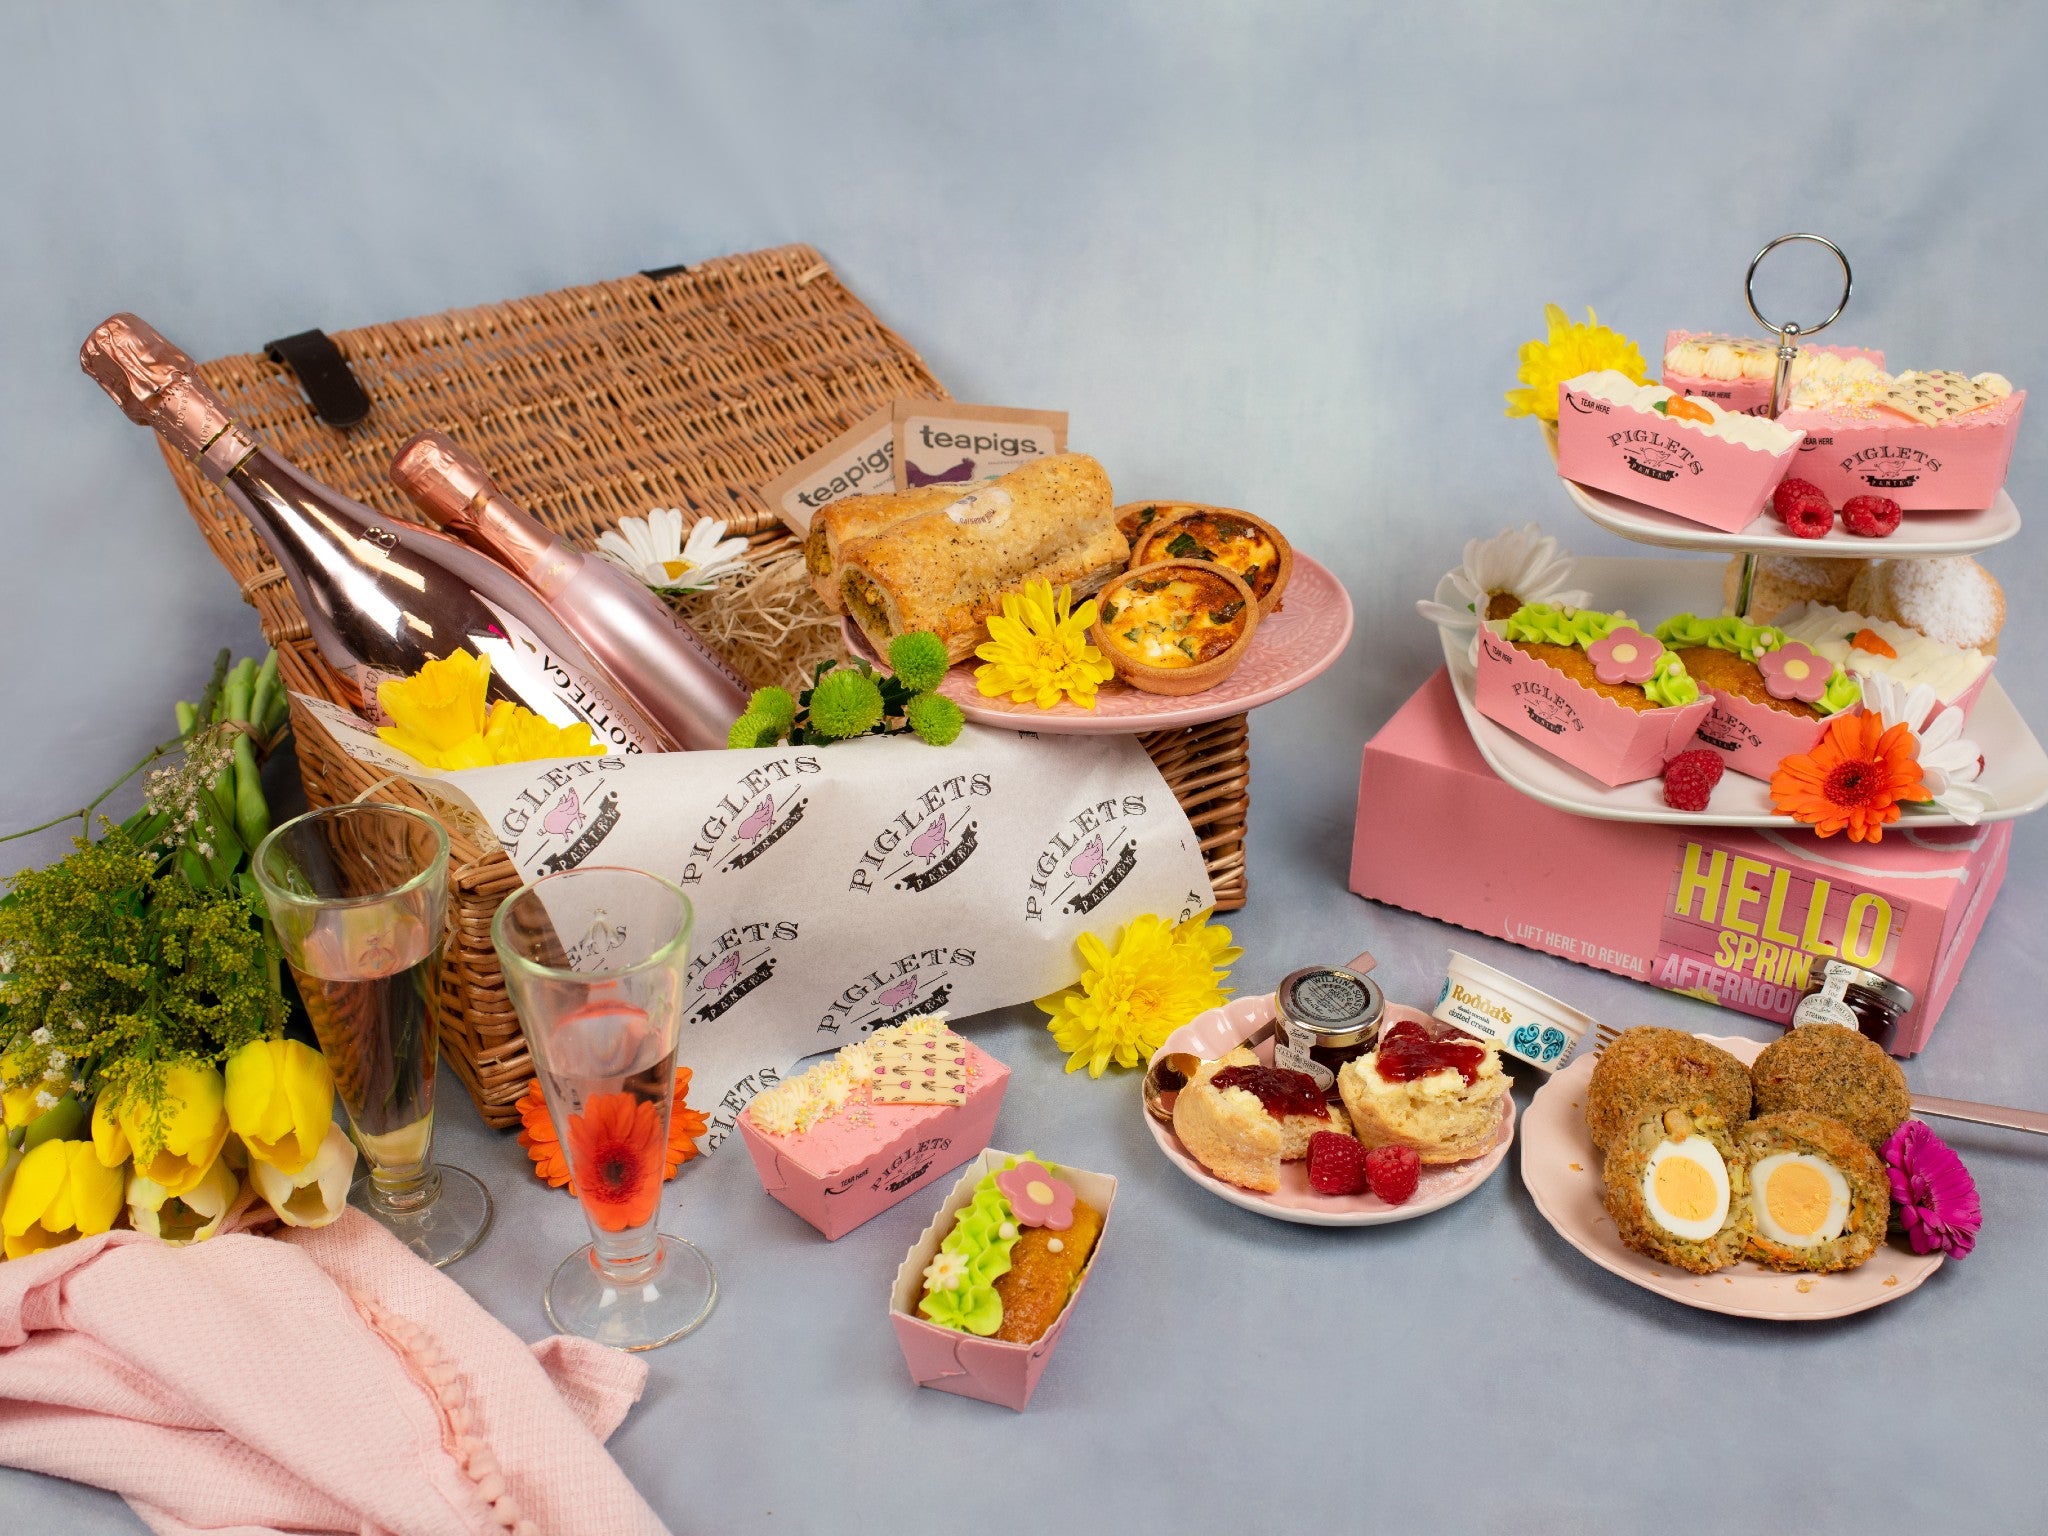 Piglets Pantry Hello Spring afternoon tea for two indybest.jpg